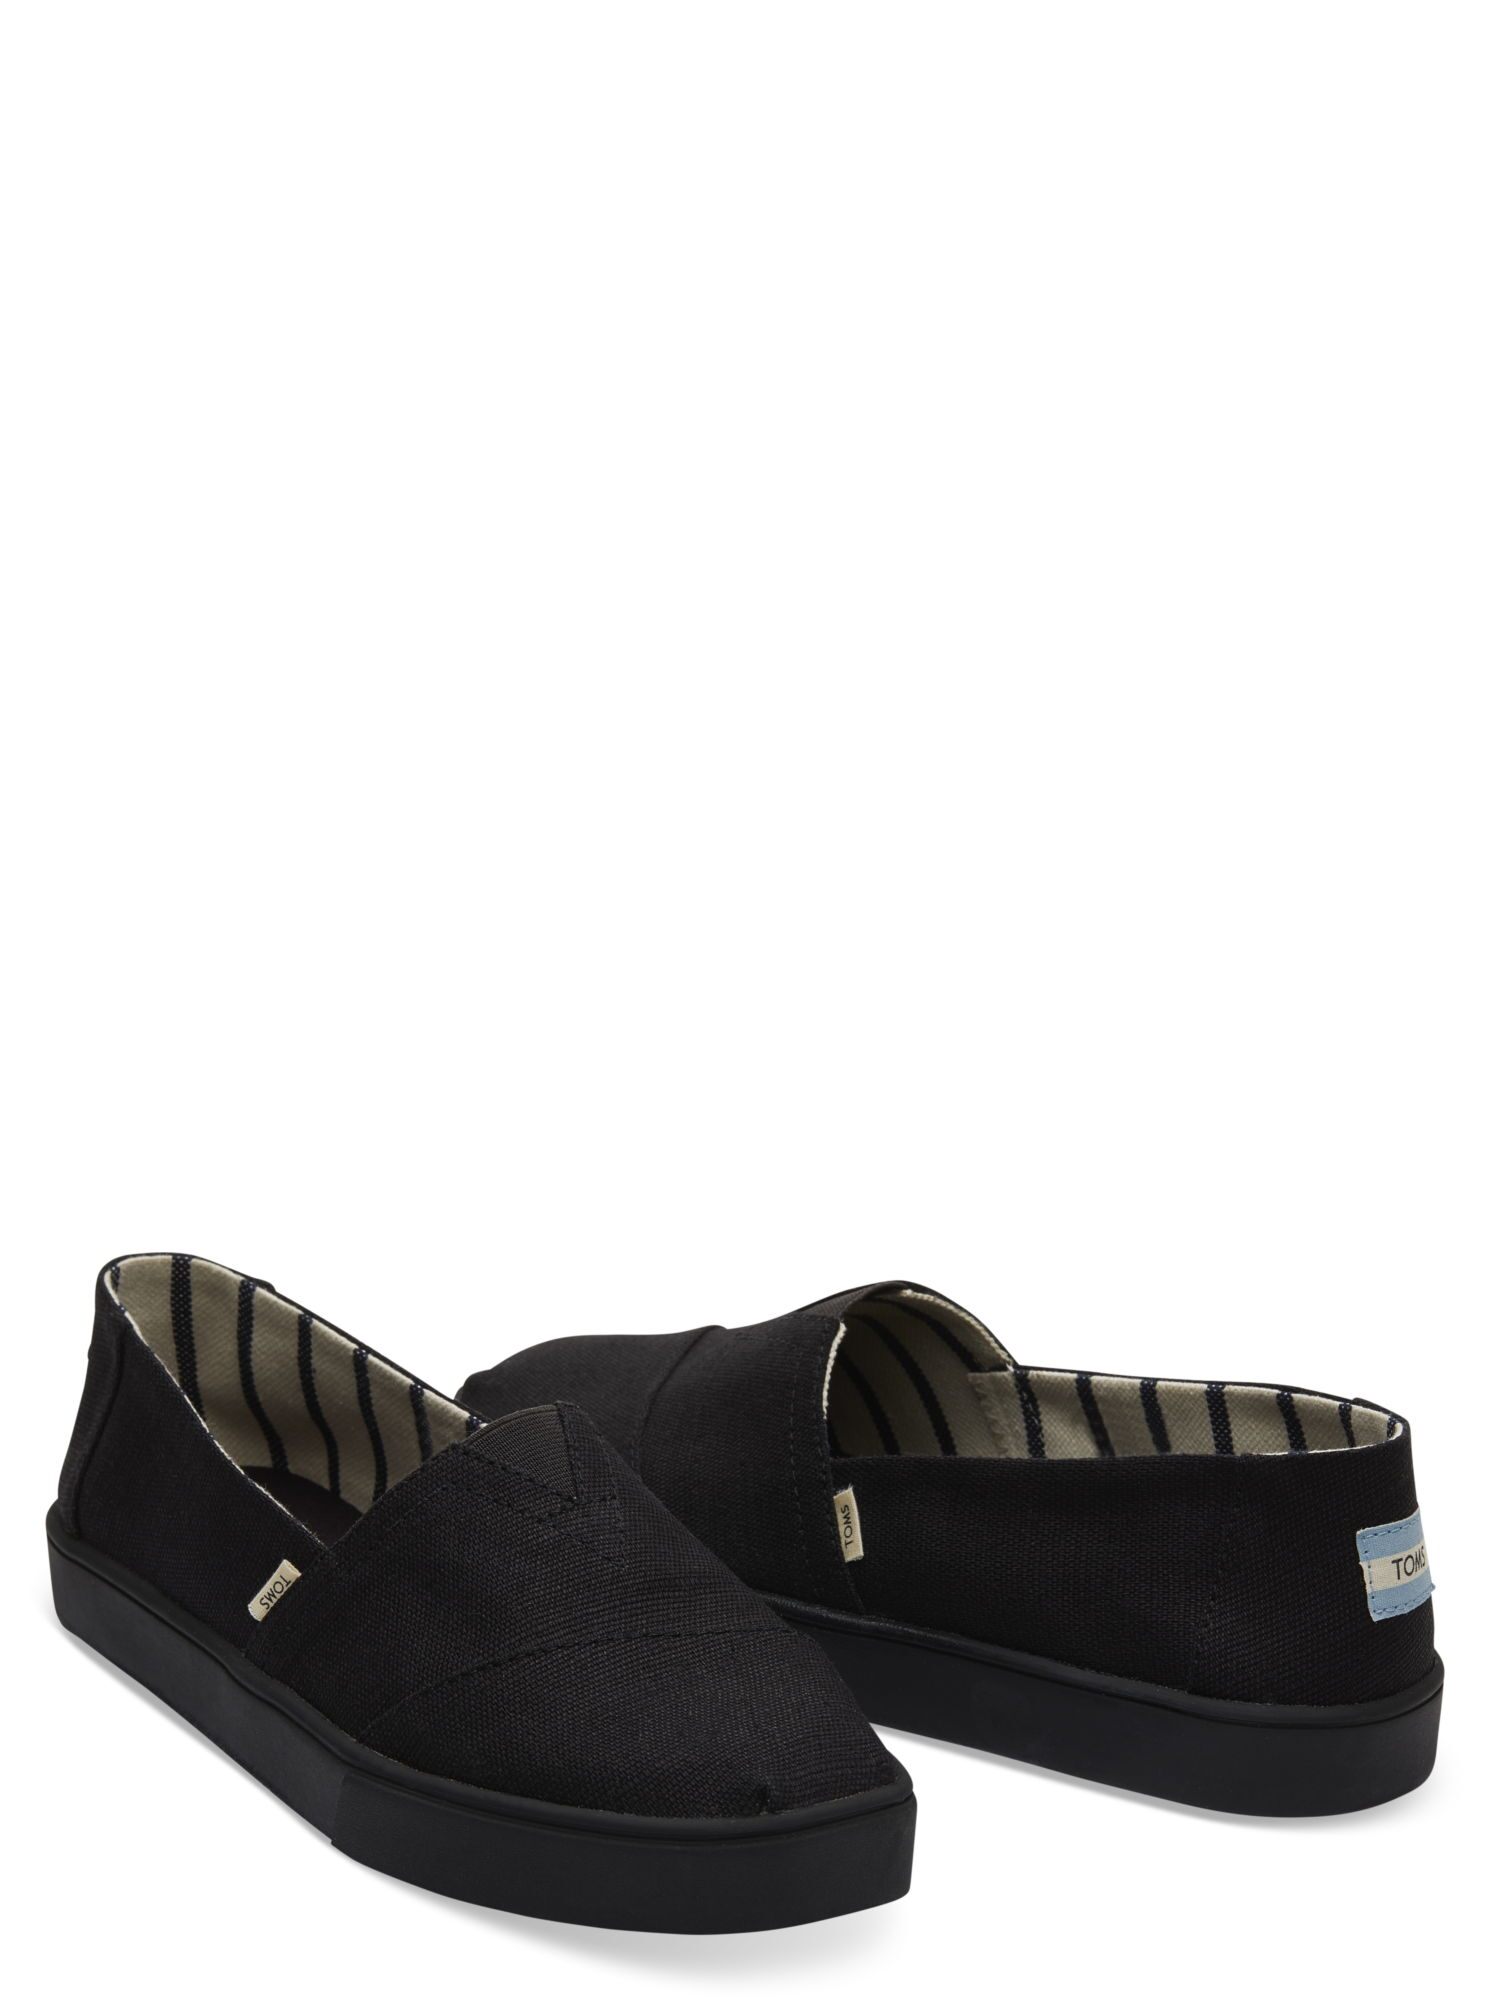 TOMS Men's on Canvas Cupsole Classic Slip-On Shoes - image 2 of 3